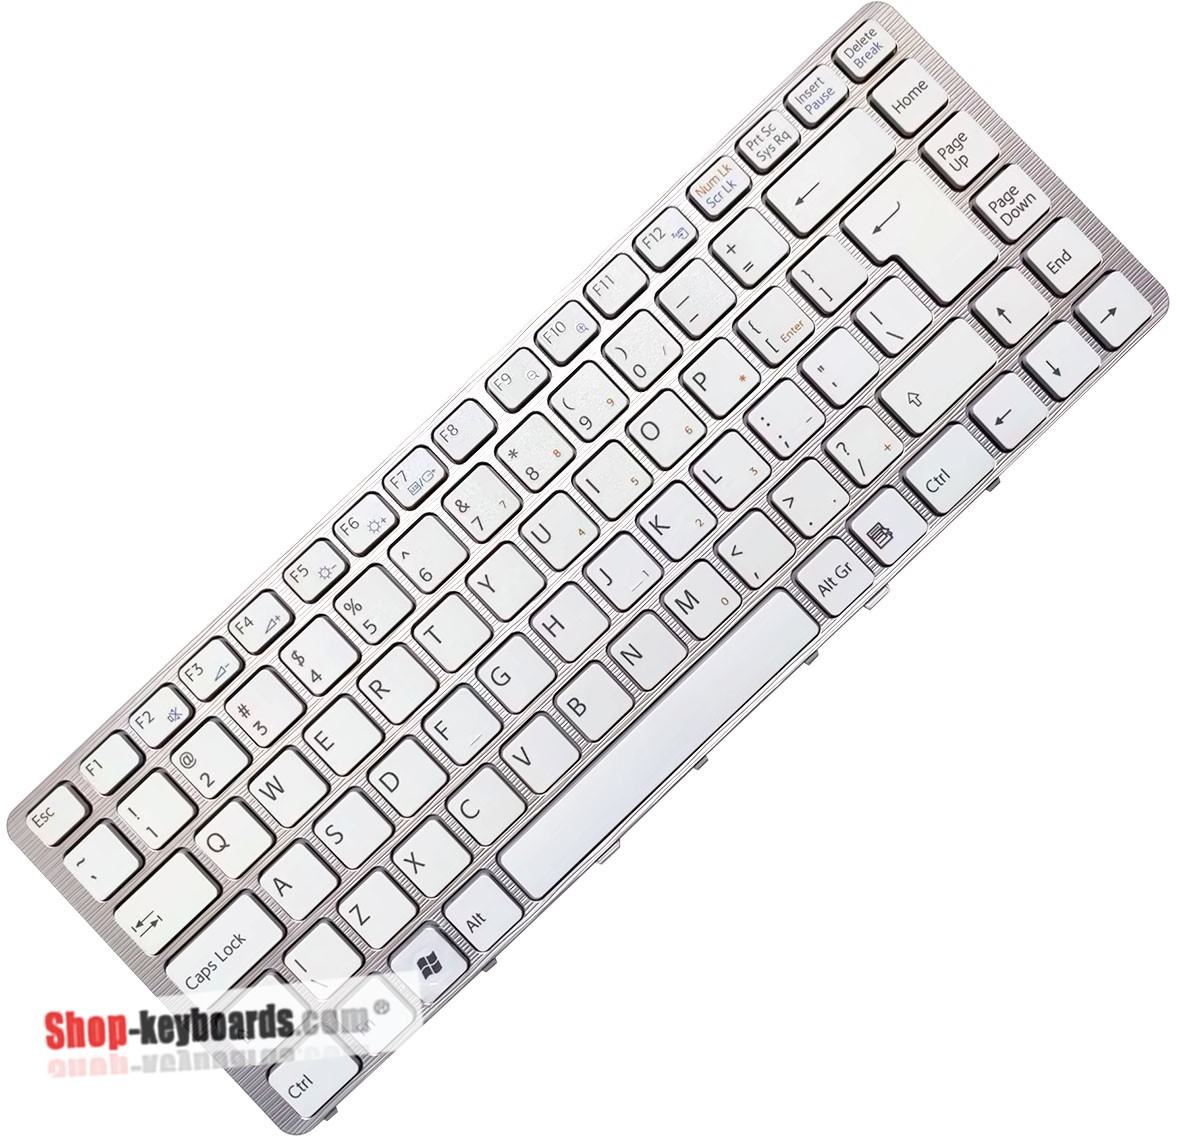 Sony 148763131 Keyboard replacement